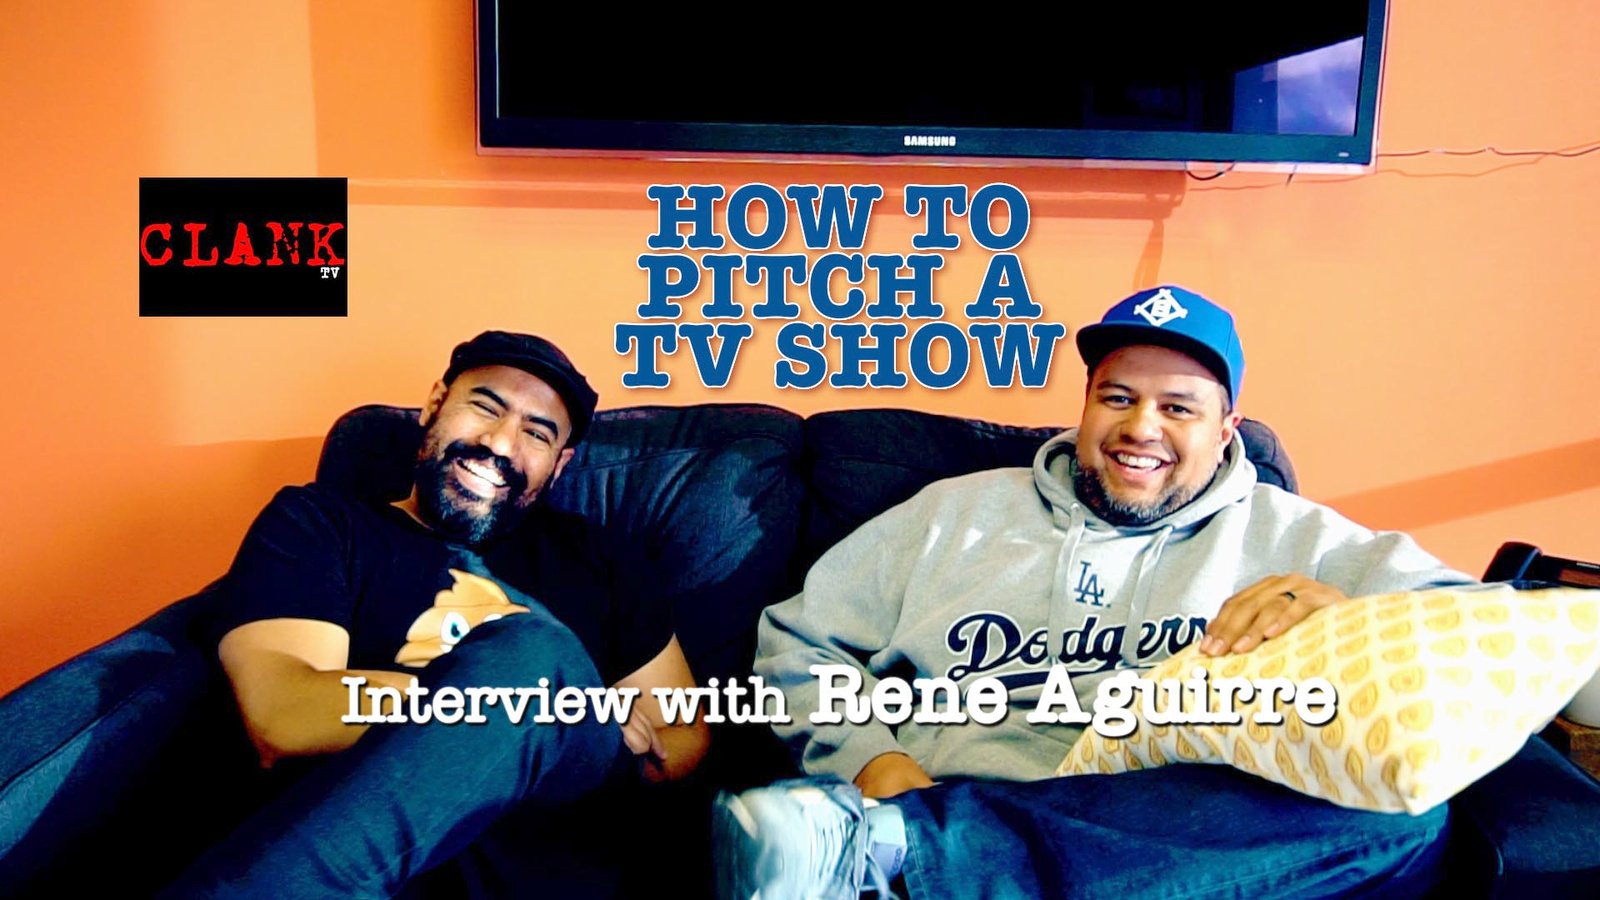 How To Pitch a TV Show (Things NOT to do) – Interview with Rene Aguirre